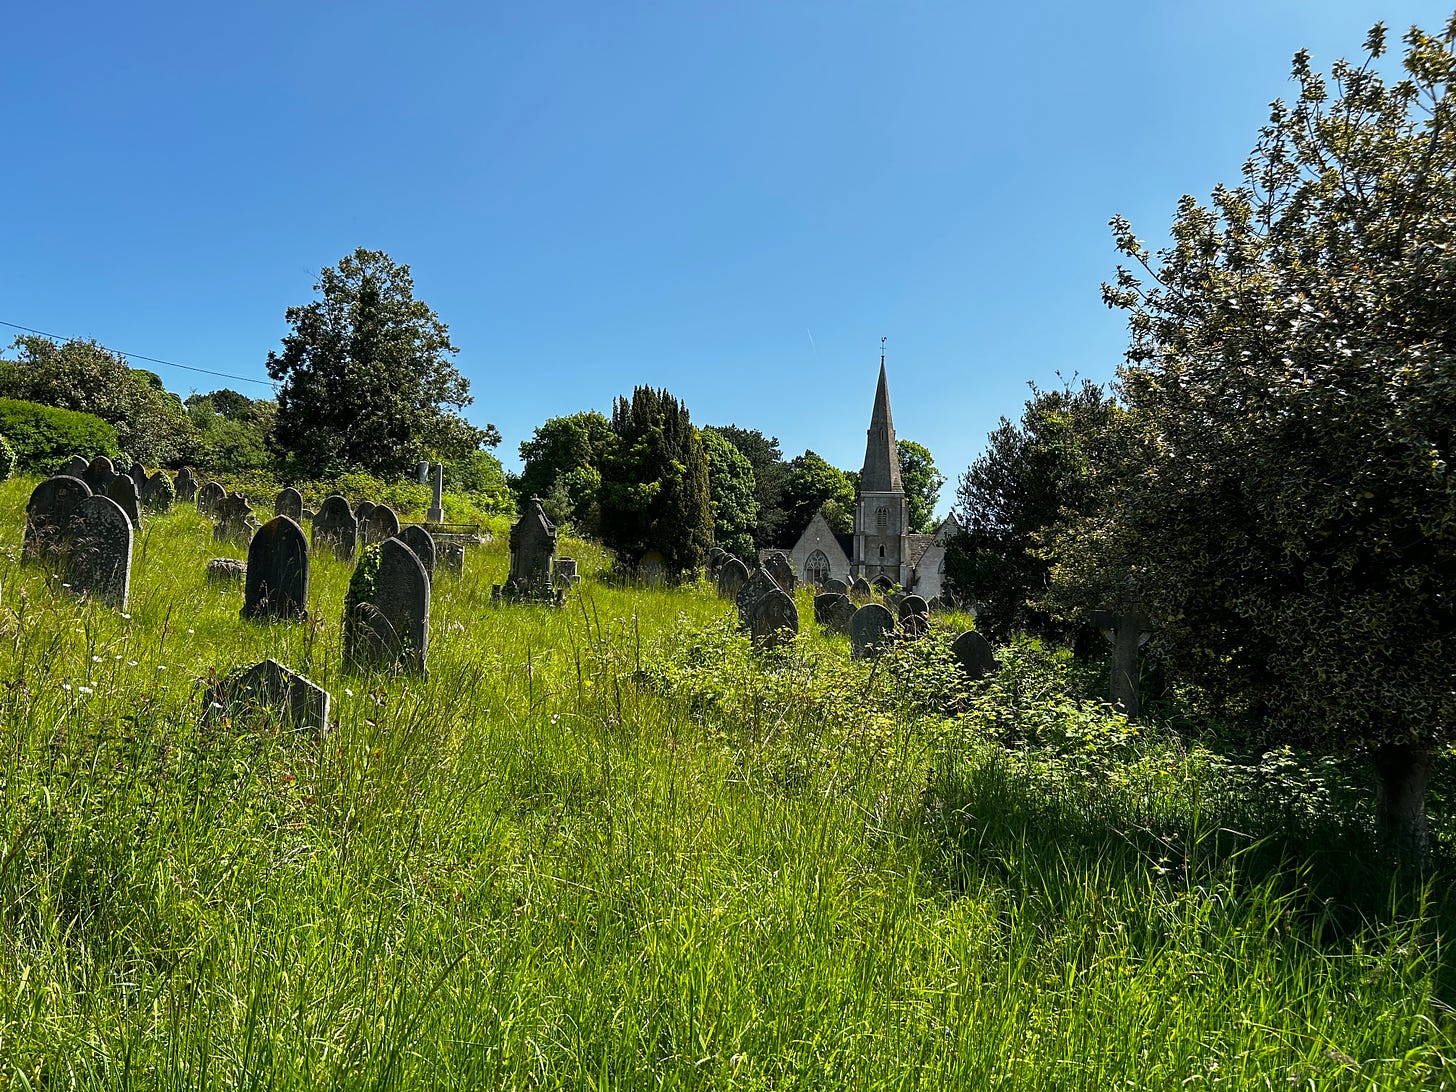 A church and cemetery surrounded by nature.